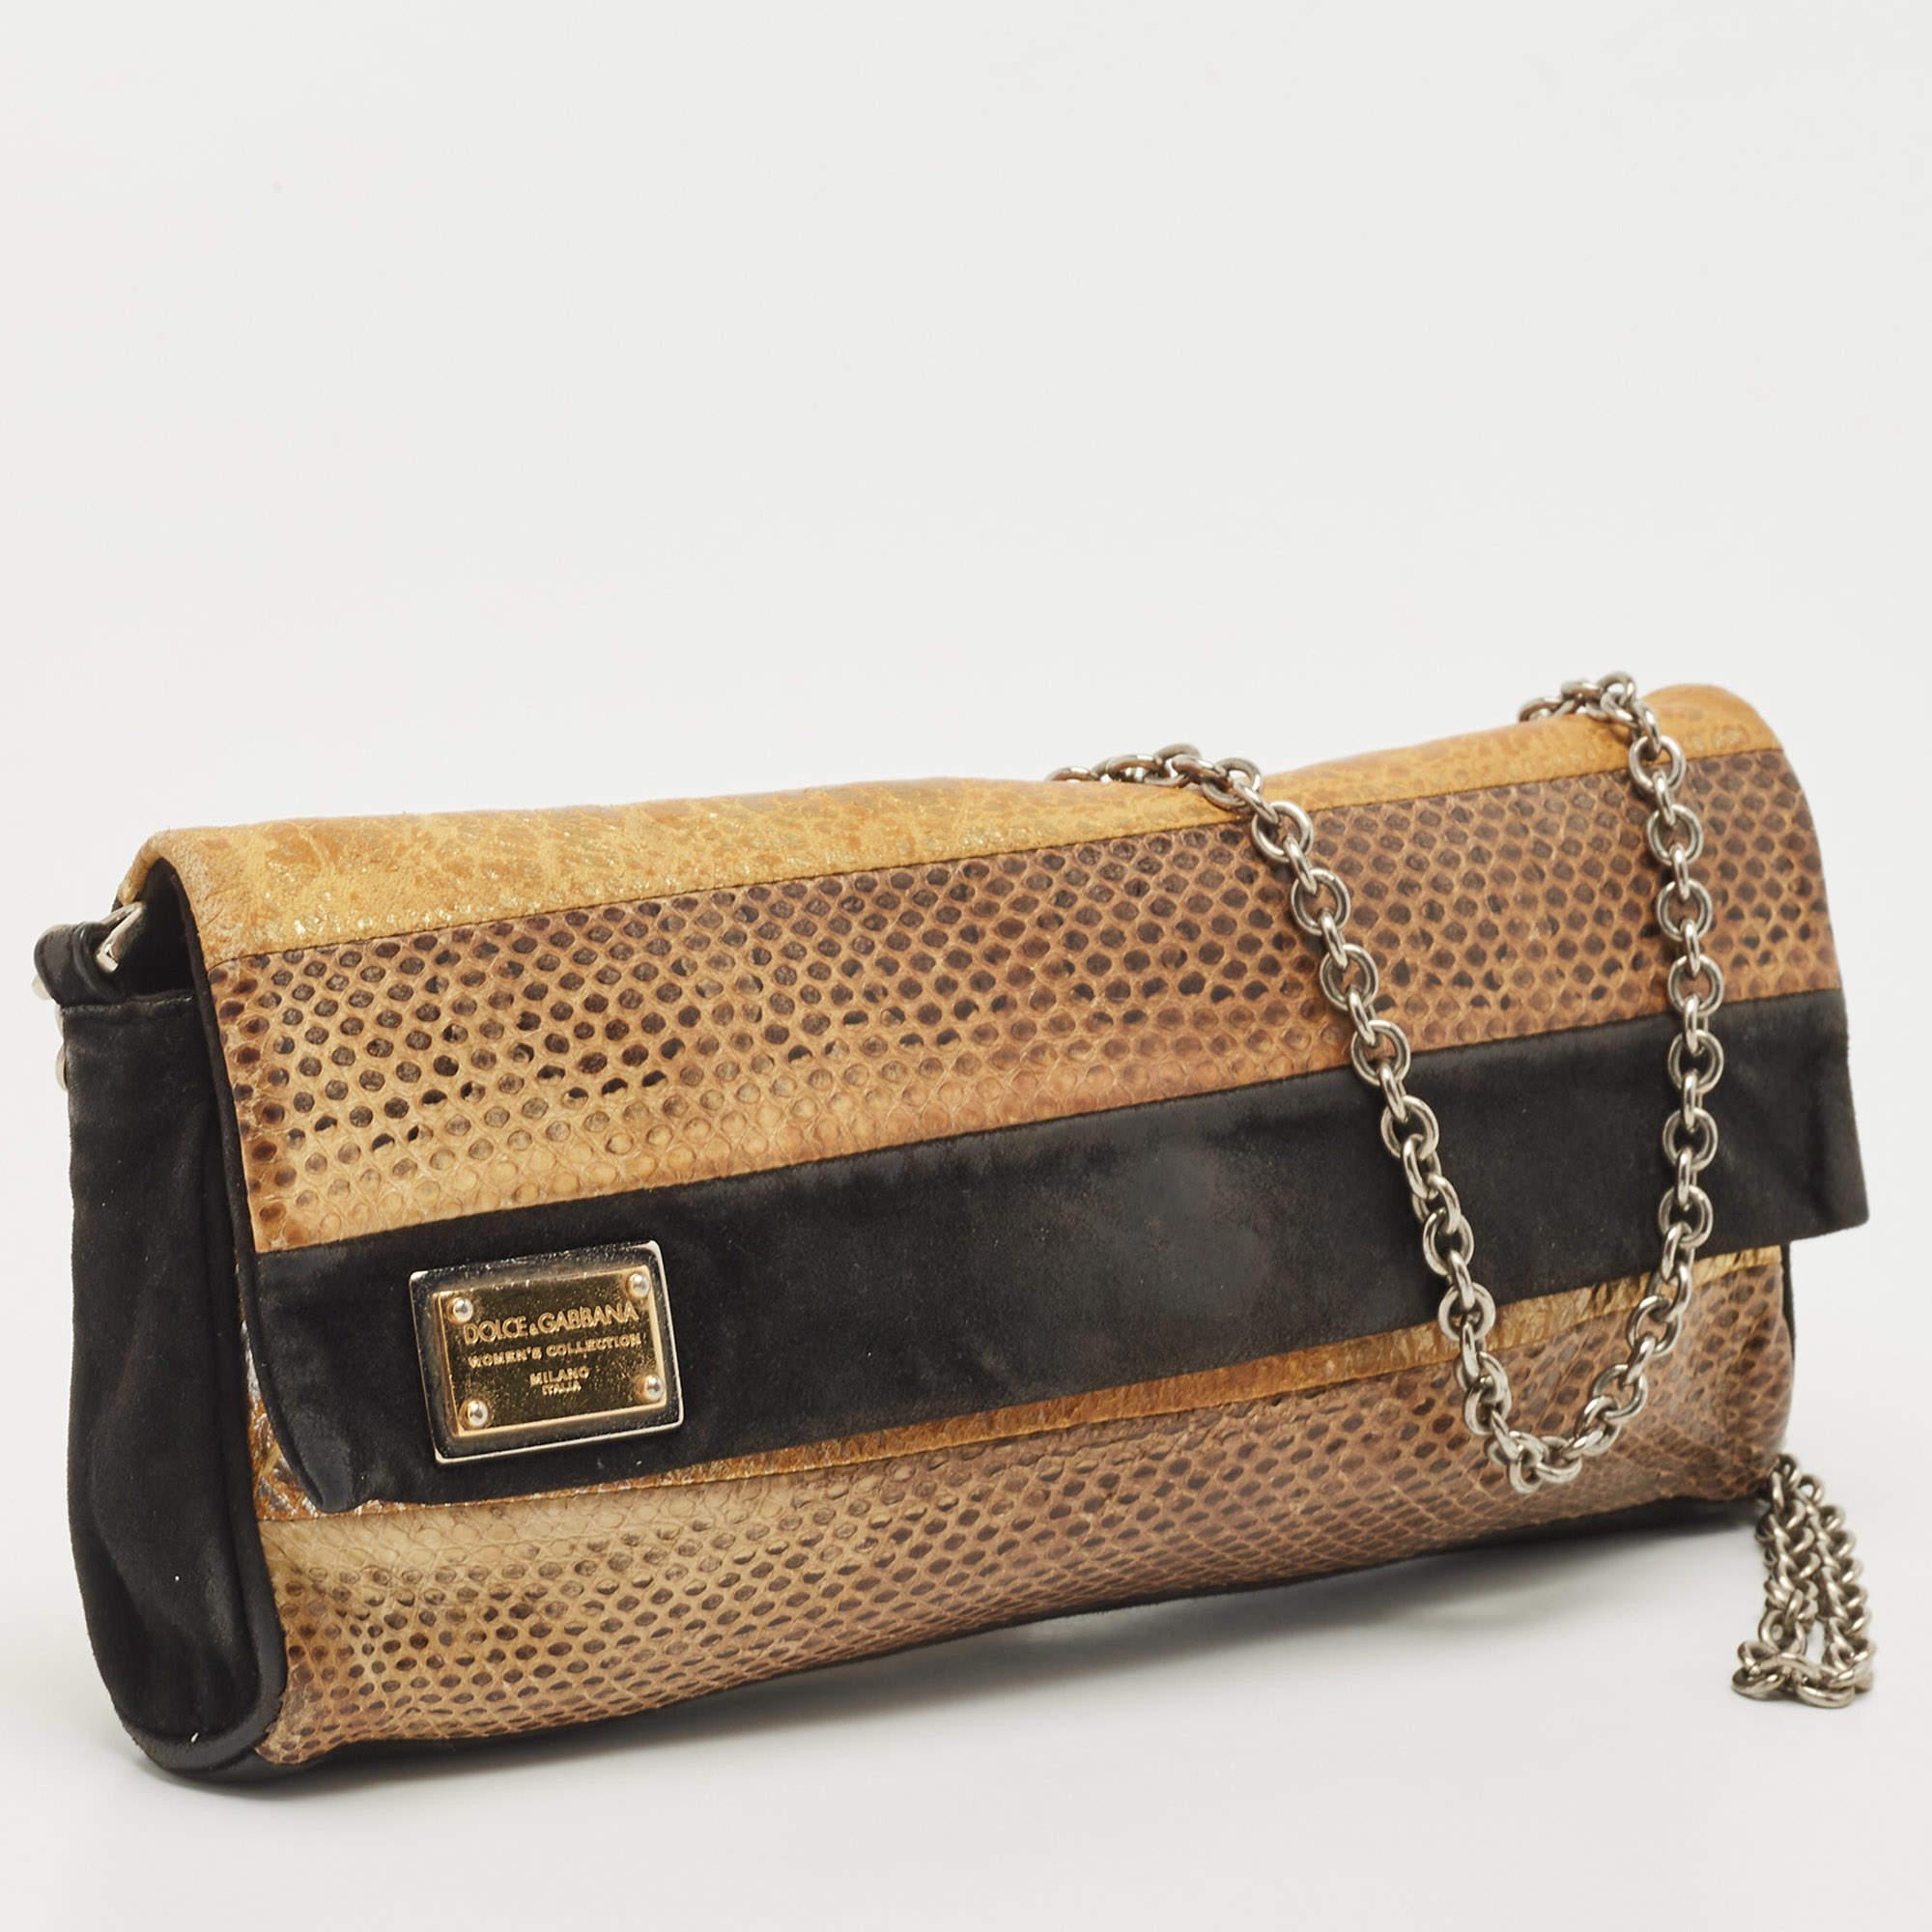 Trust this Dolce & Gabbana clutch bag to be light, durable, and comfortable to carry. It is crafted beautifully using the best materials to be a durable style ally.

